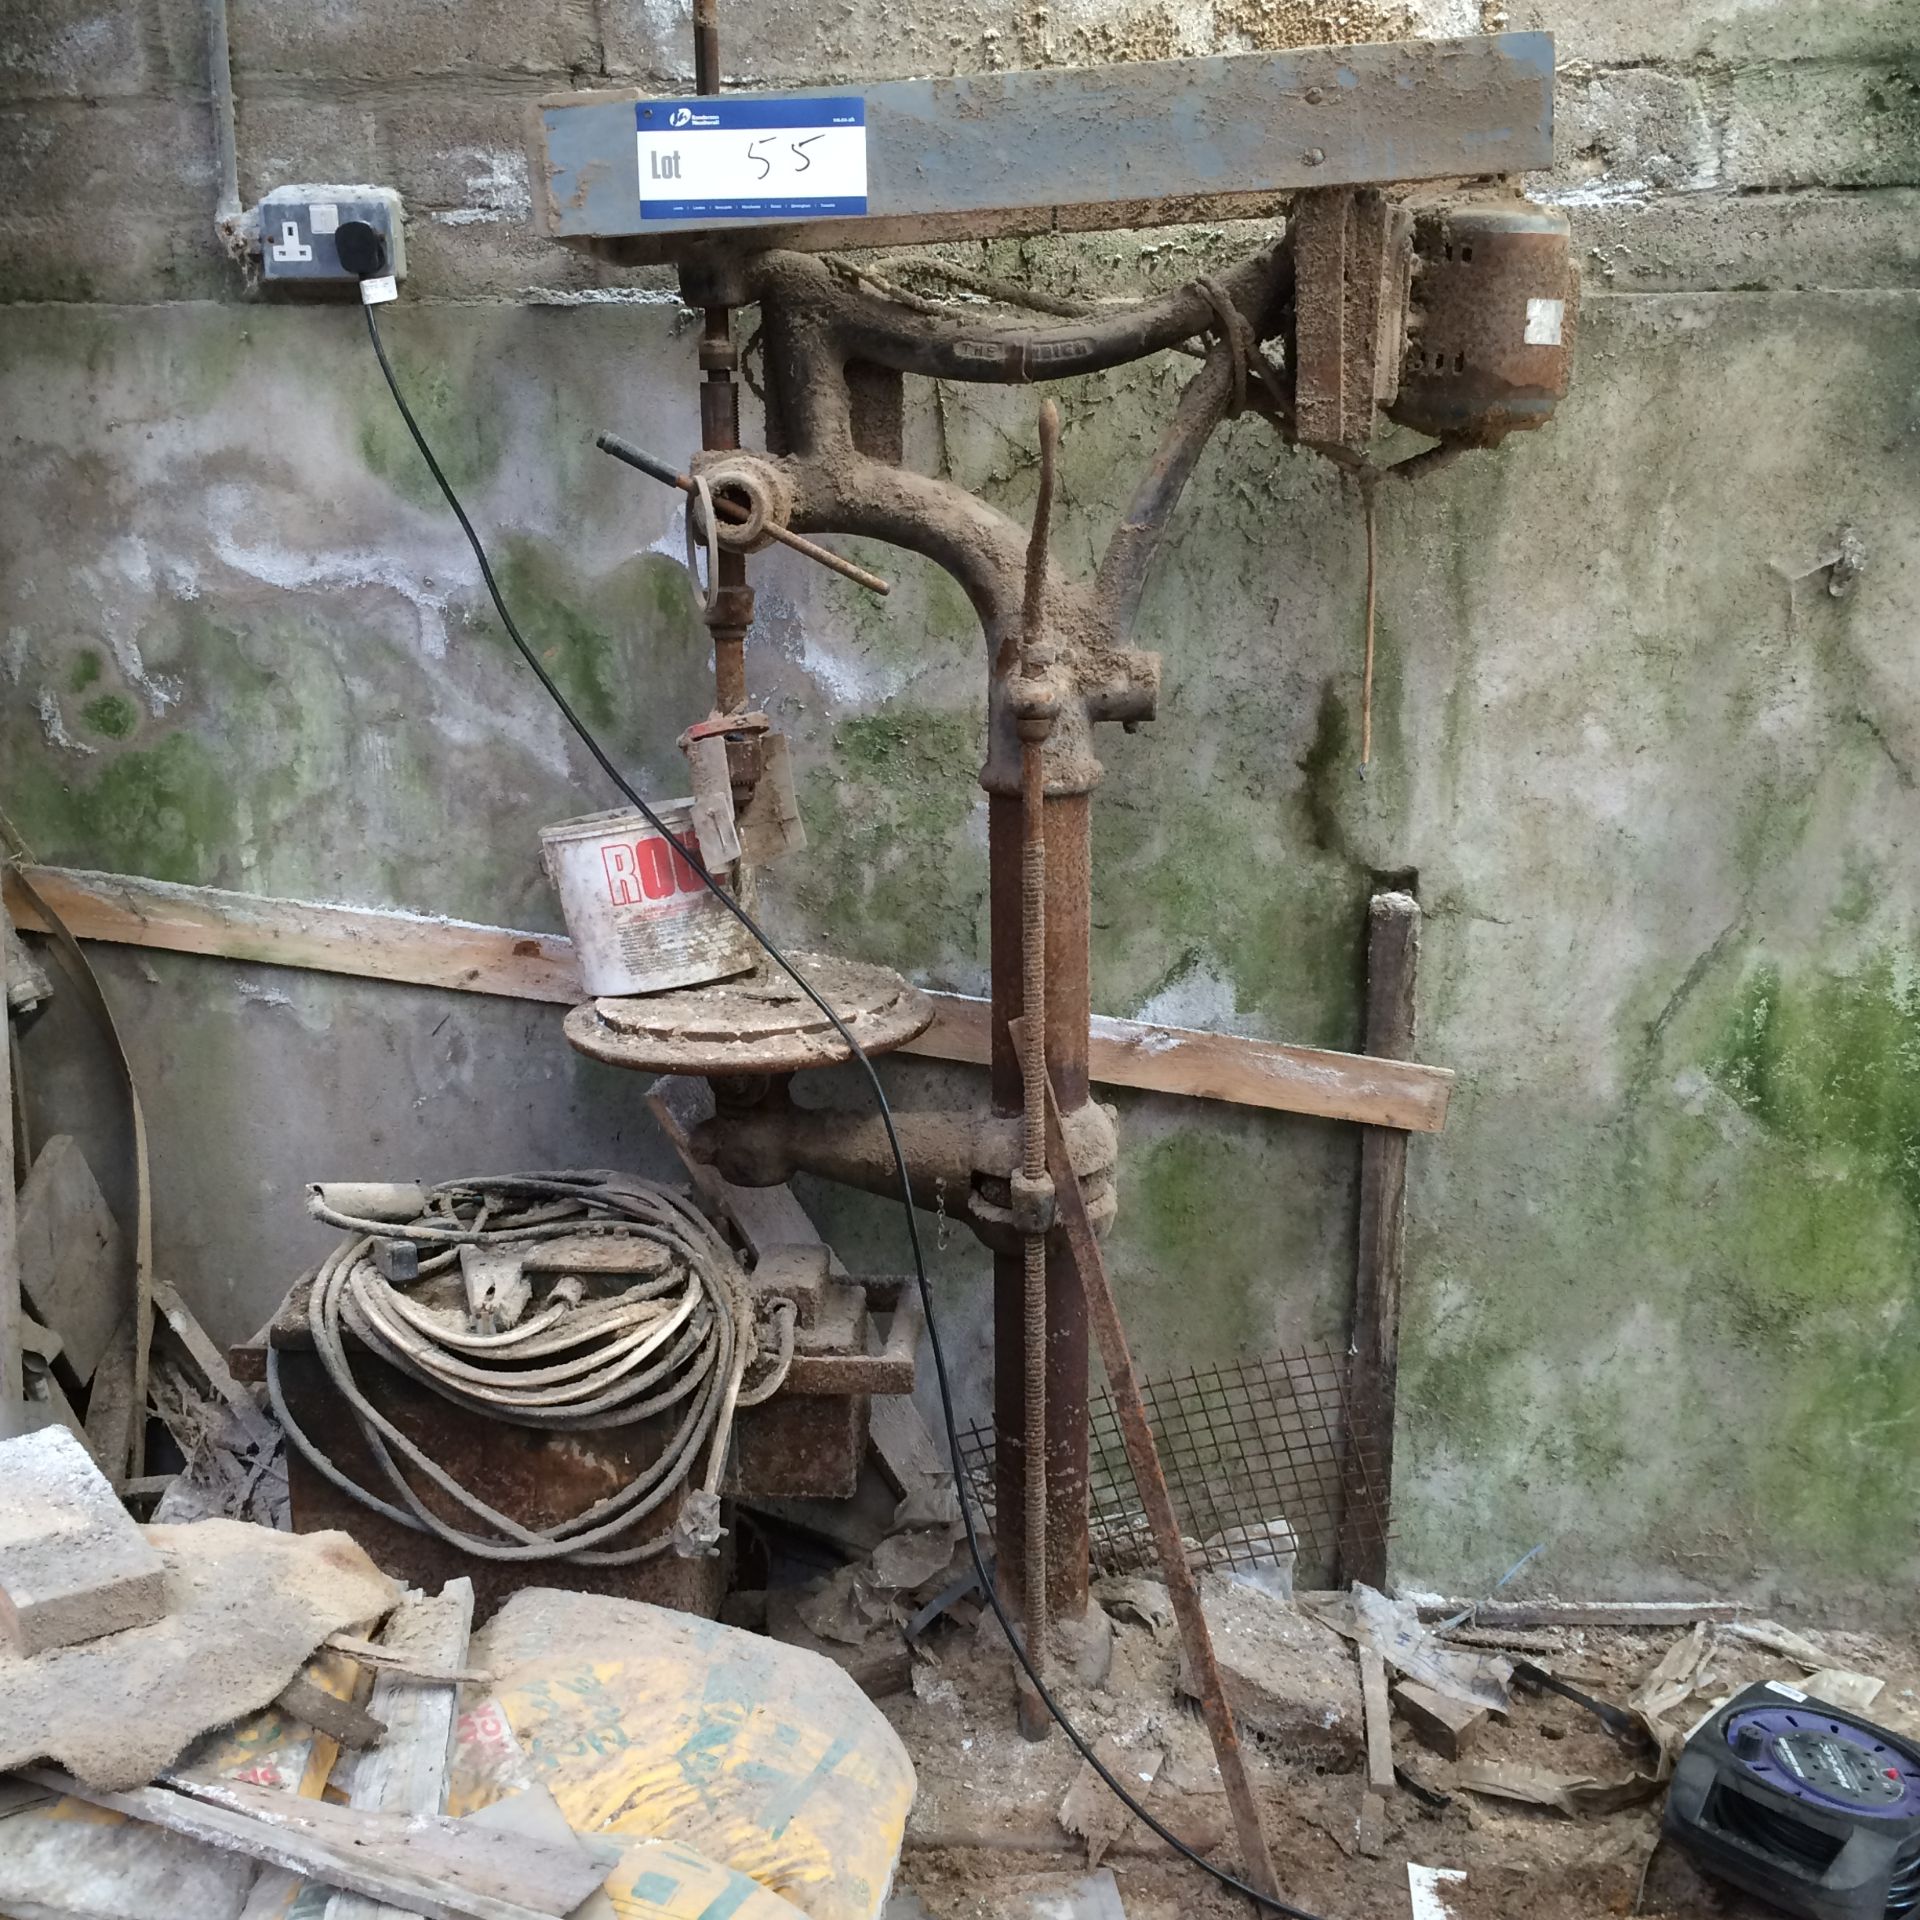 Remaining Loose Contents of Ground Floor Store, including pillar drill and arc welder